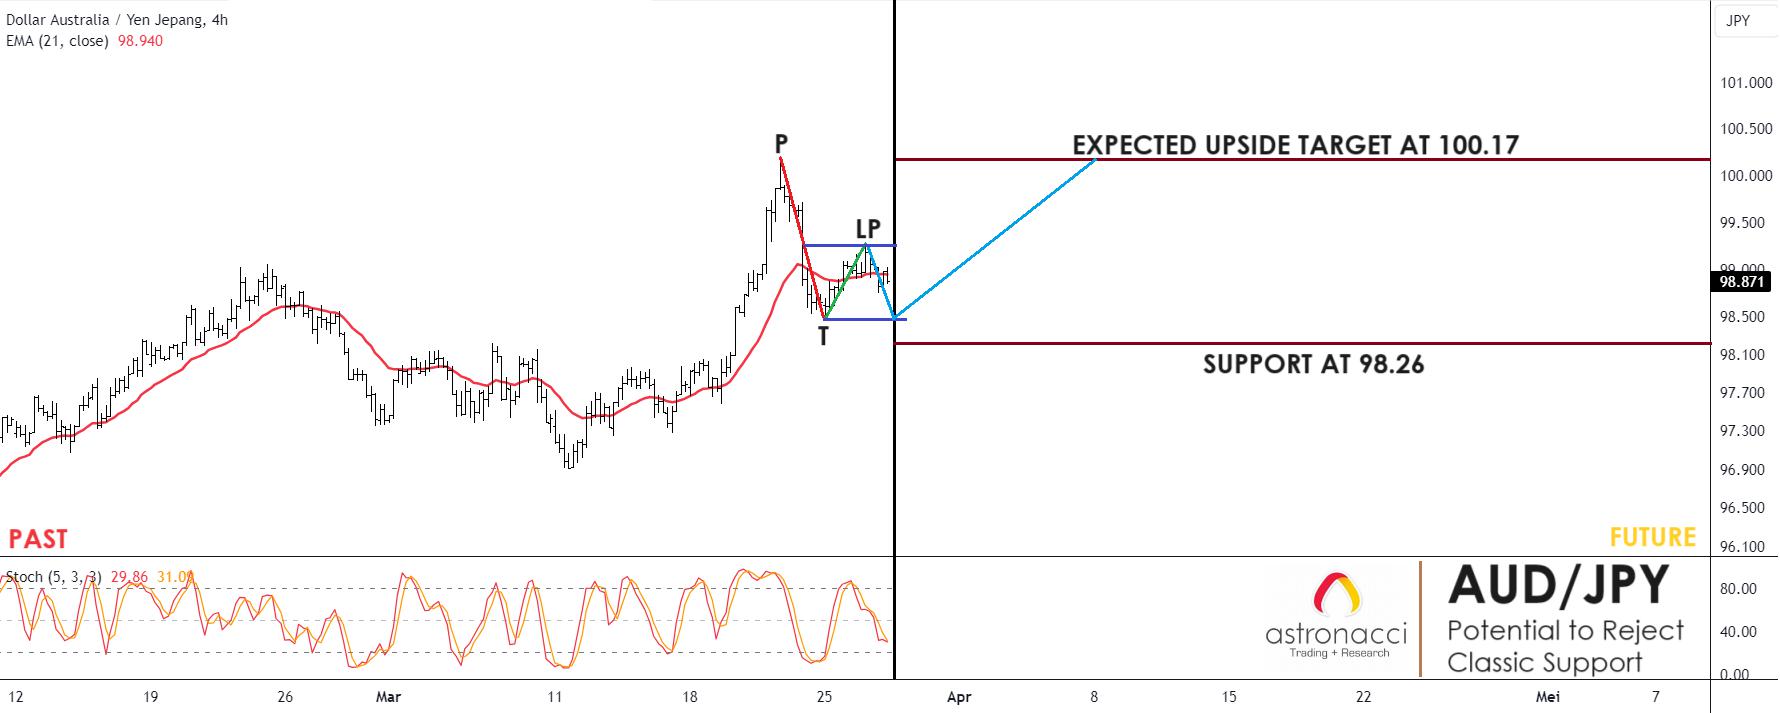 POTENTIAL TO REJECT CLASSIC SUPPORT IN AUD/JPY